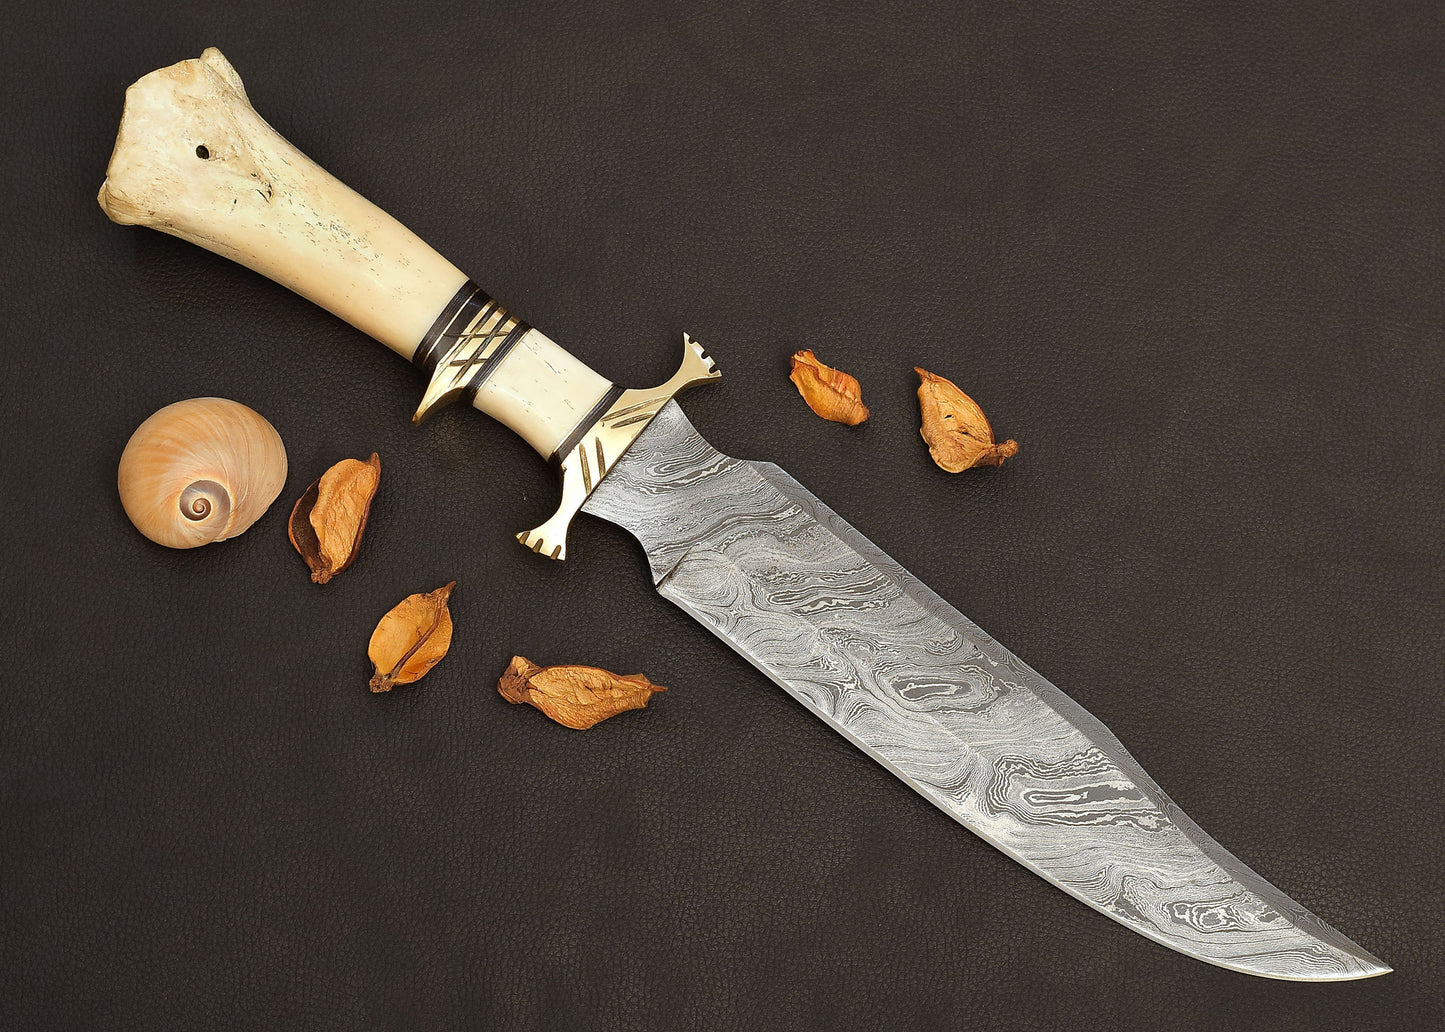 Damascus Steel Hunting knife with camel bone handle